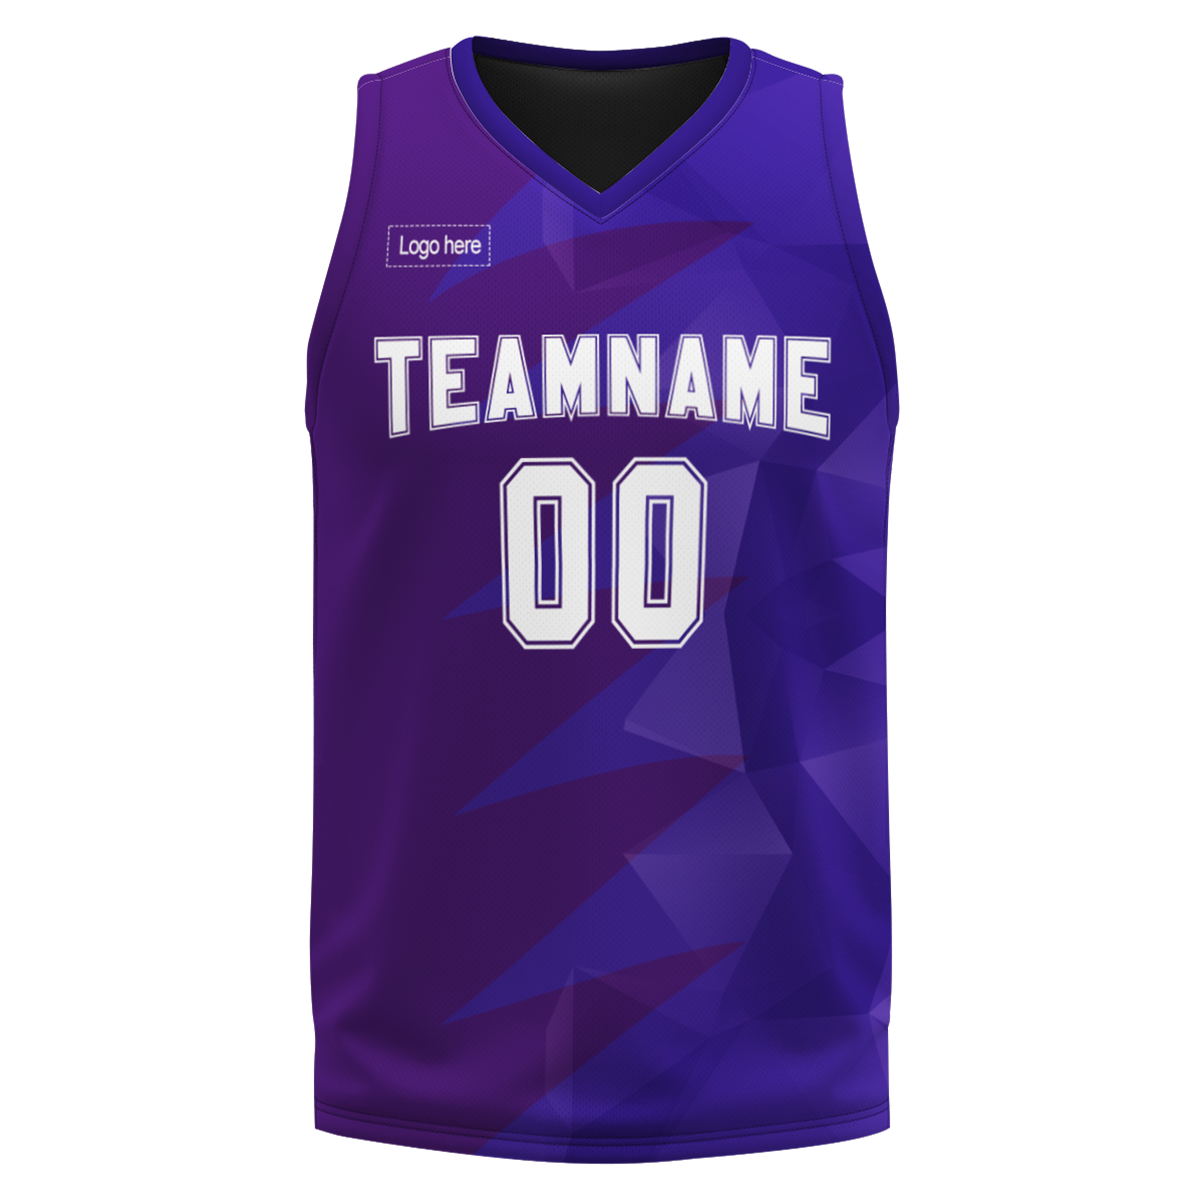 factory-custom-polyester-sublimation-basketball-jersey-shirts-printing-logo-basketball-suits-for-men-women-at-cj-pod-4